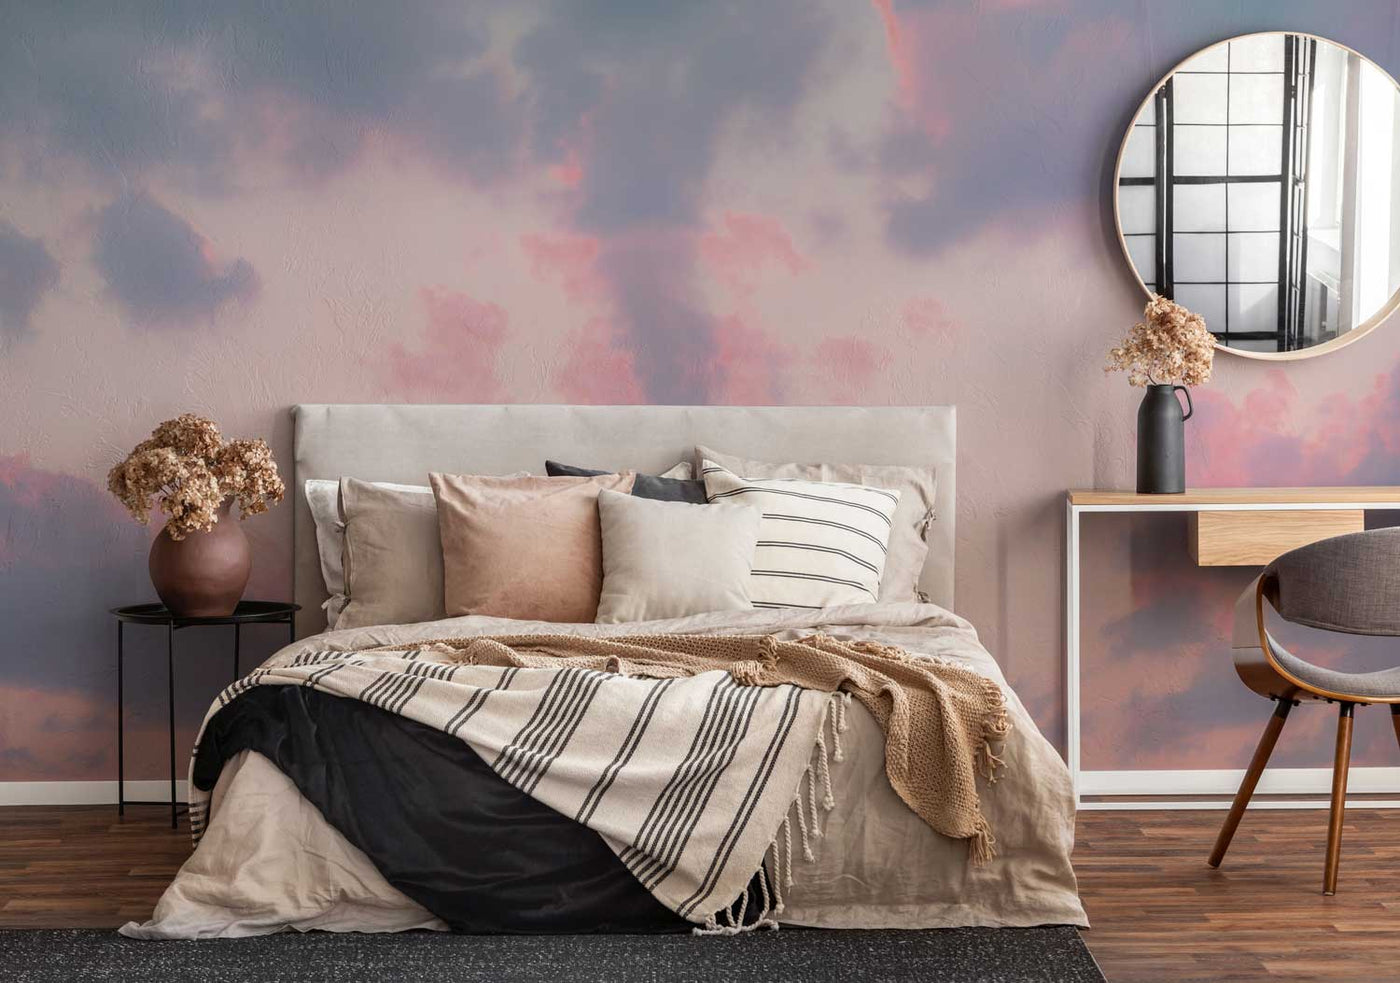 Cotton Candy Sky Wall Mural-Wall Mural-Eazywallz